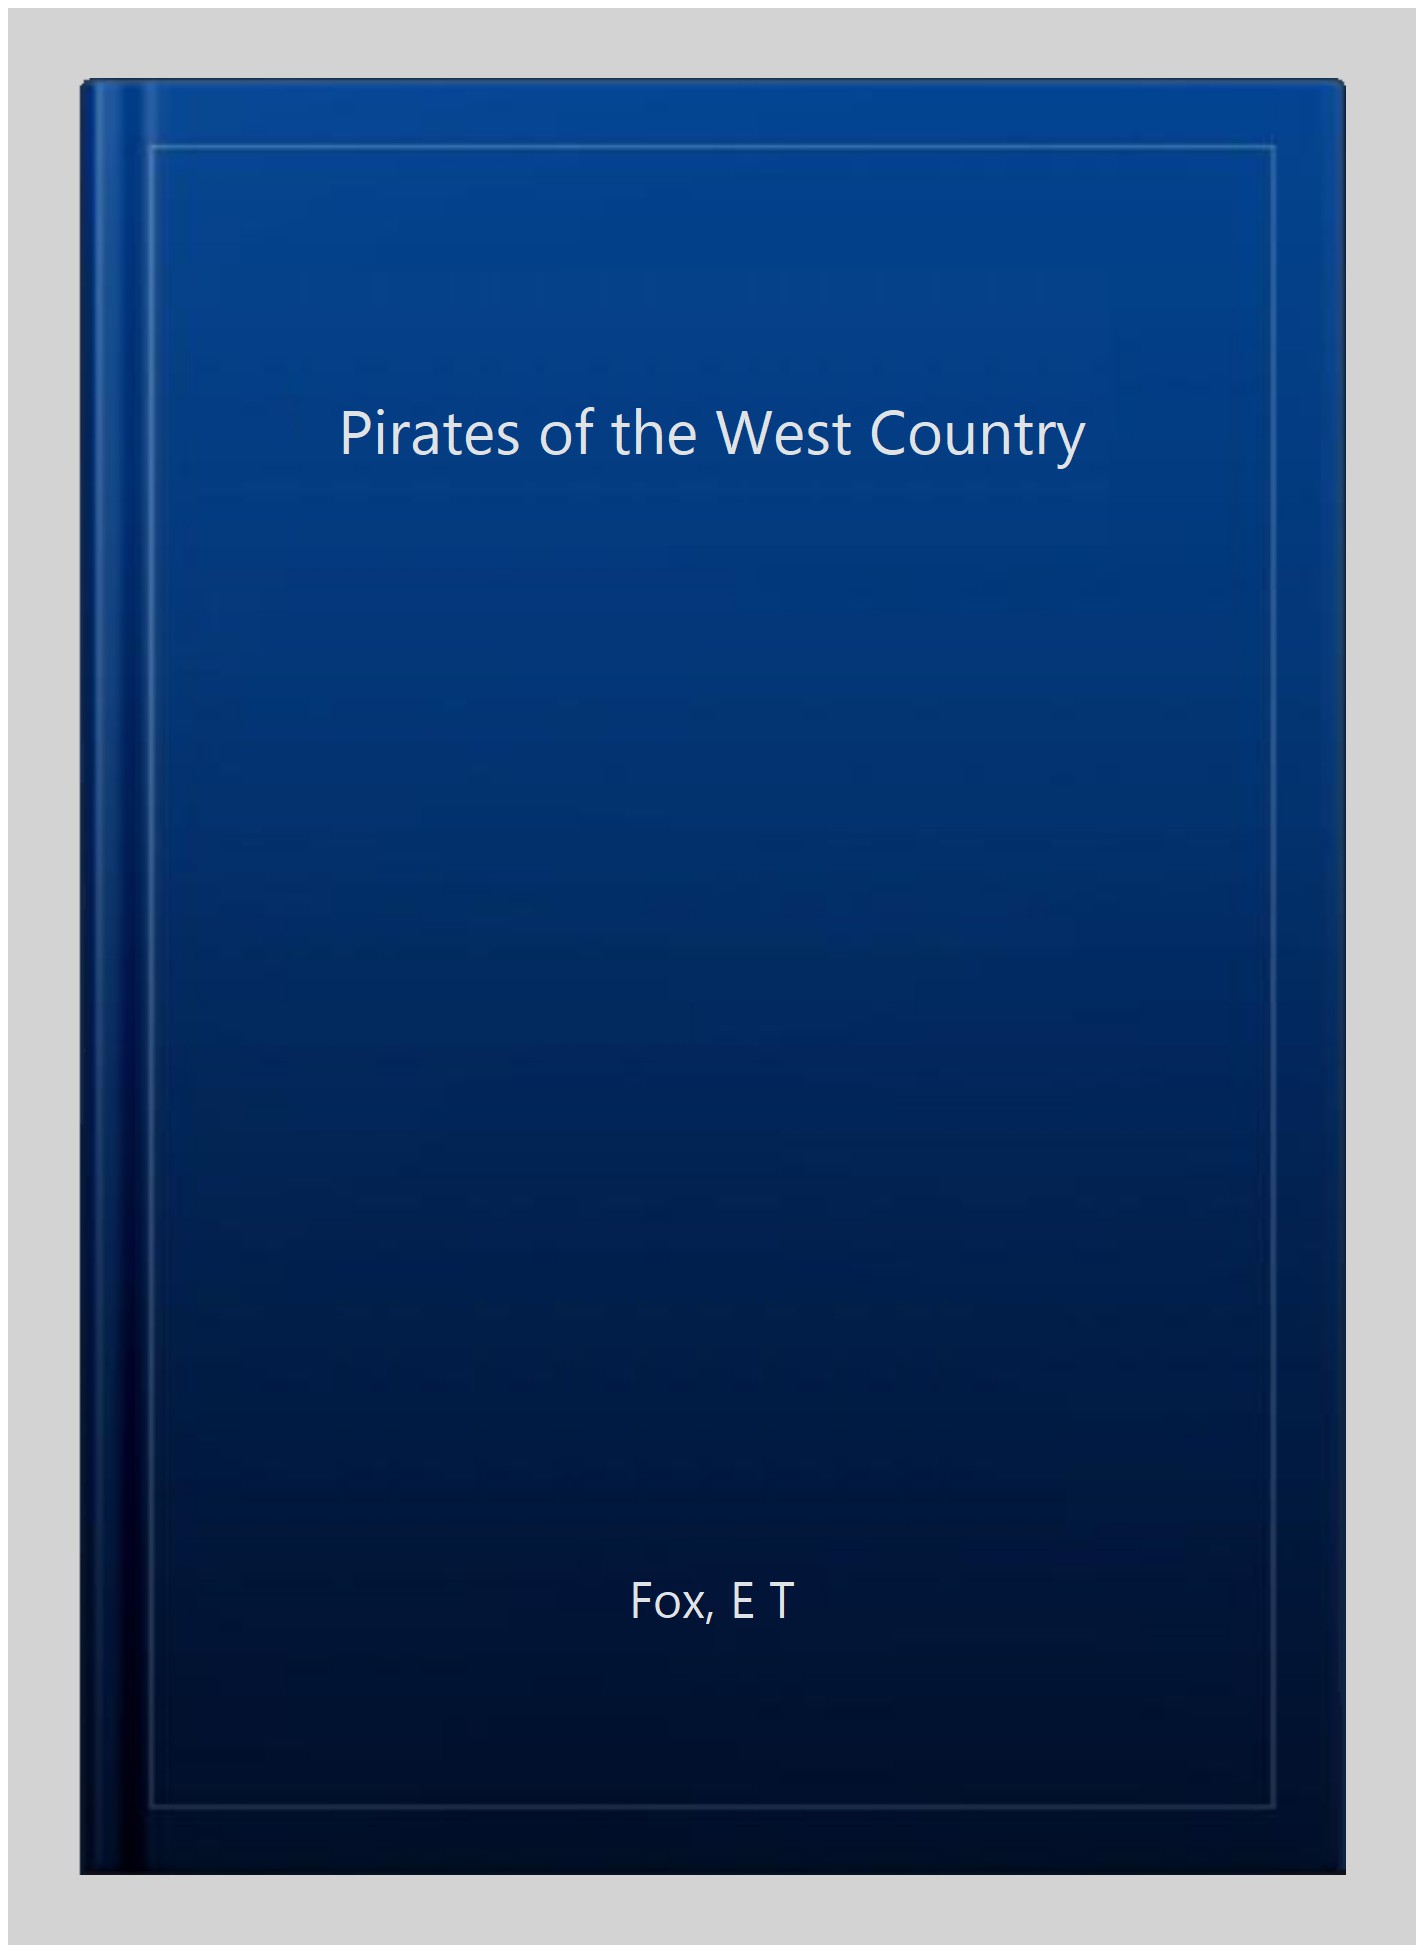 Pirates of the West Country - Fox, E T